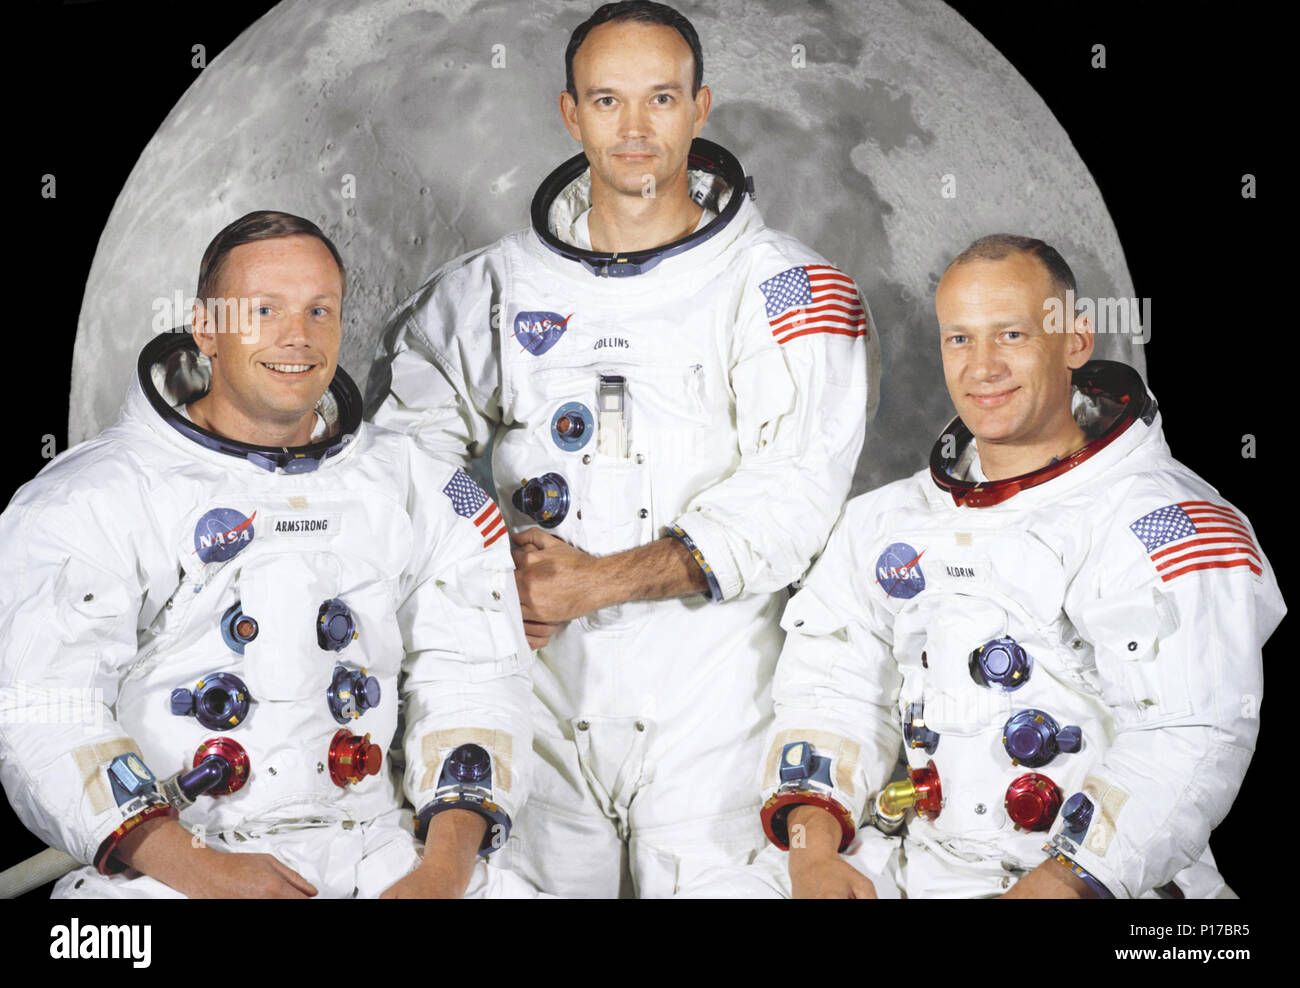 Portrait of the prime crew of the Apollo 11 lunar landing mission. From left to right they are: Commander, Neil A. Armstrong, Command Module Pilot, Michael Collins, and Lunar Module Pilot, Edwin E. Aldrin Jr. On July 20th 1969 at 4:18 PM, EDT the Lunar Module 'Eagle' landed in a region of the Moon called the Mare Tranquillitatis, also known as the Sea of Tranquillity. After securing his spacecraft, Armstrong radioed back to earth: 'Houston, Tranquility Base here, the Eagle has landed'. At 10:56 p.m. that same evening and witnessed by a worldwide television audience, Neil Armstrong stepped off  Stock Photo